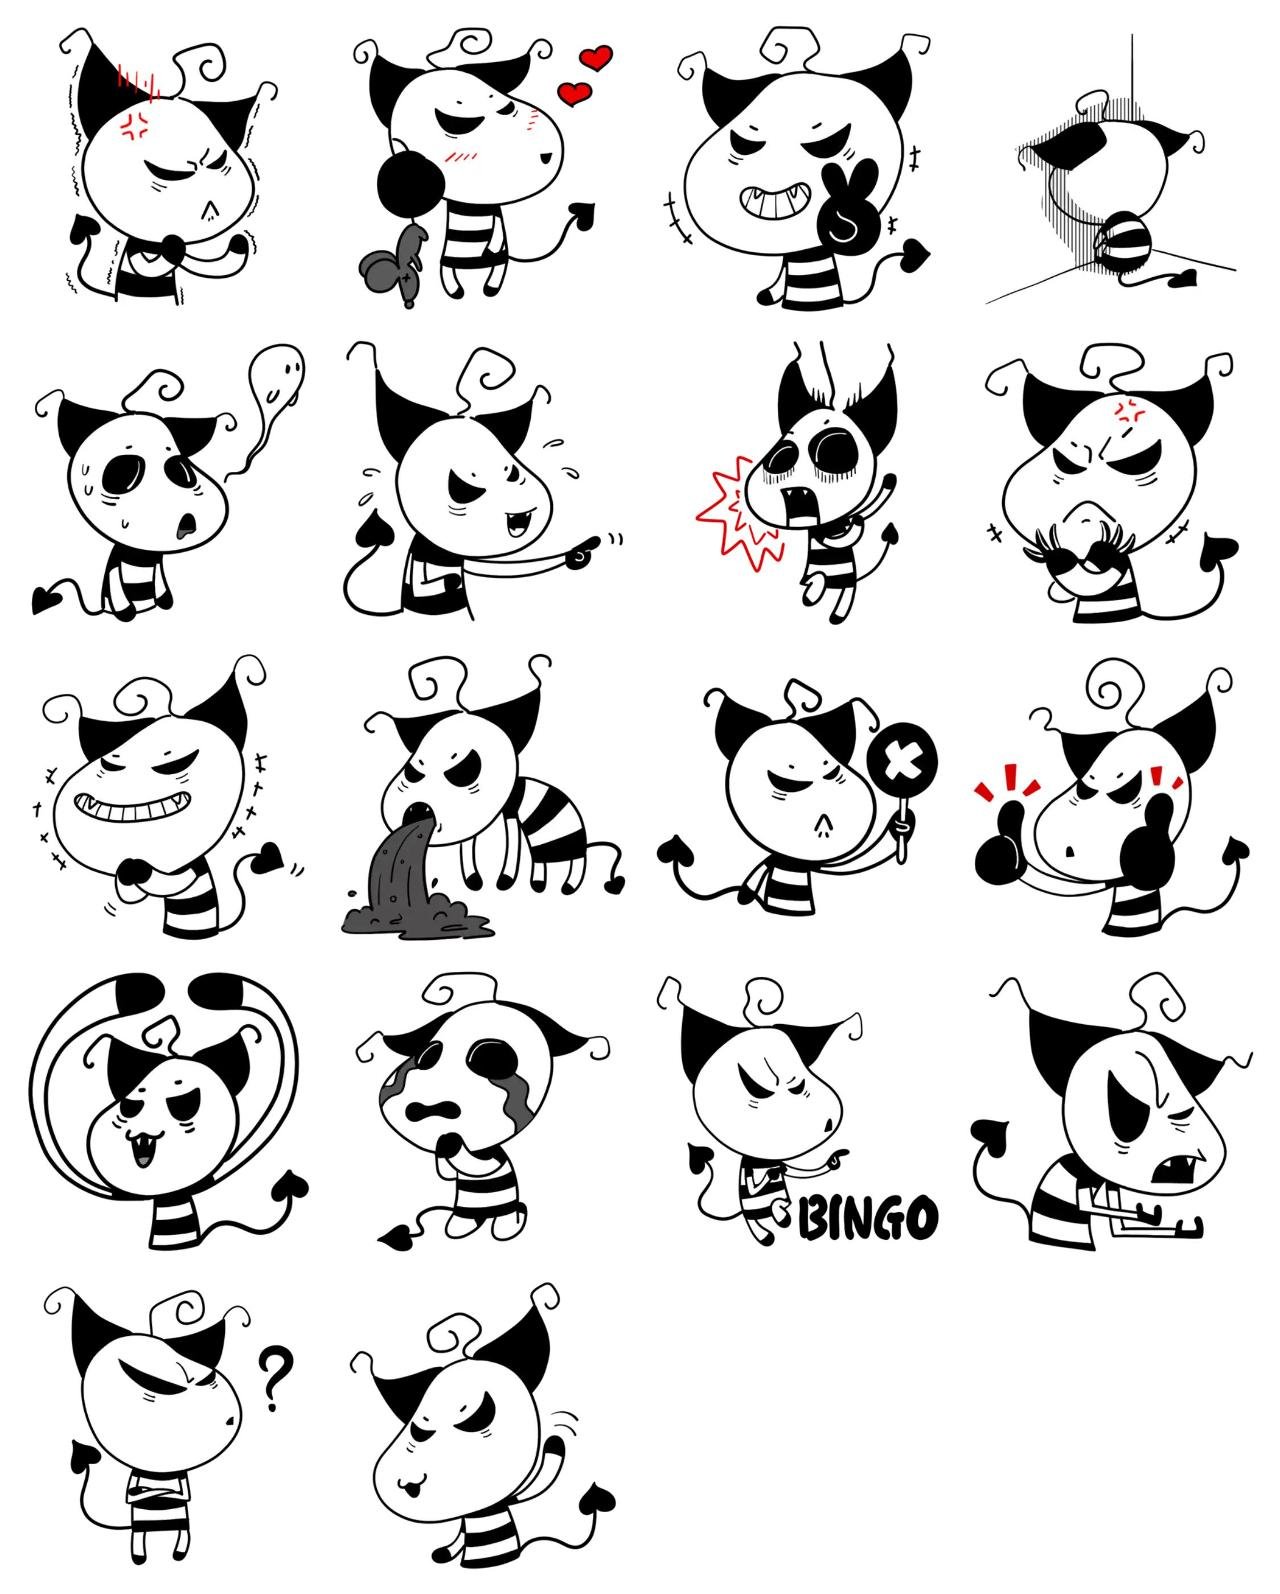 Mono Cat World Animals,Gag sticker pack for Whatsapp, Telegram, Signal, and others chatting and message apps